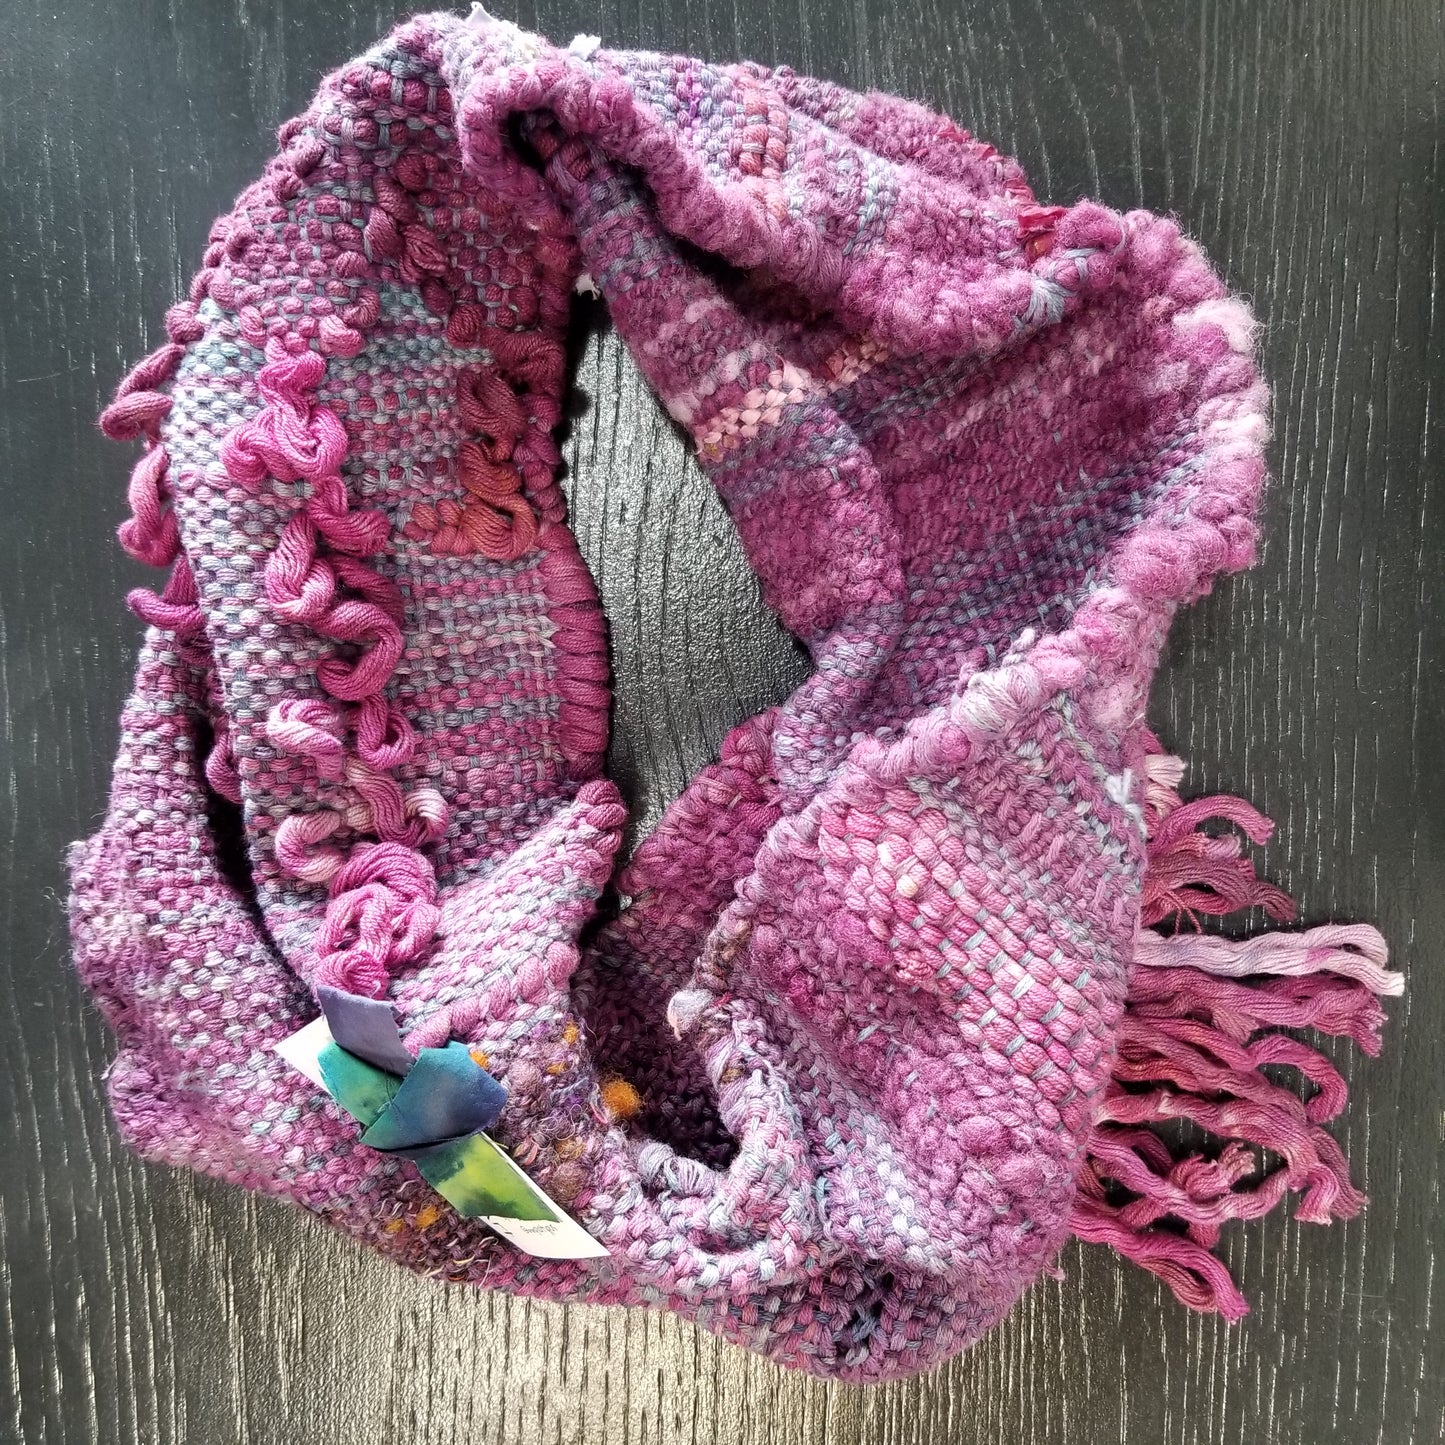 Woven Cowl Scarf by Angela